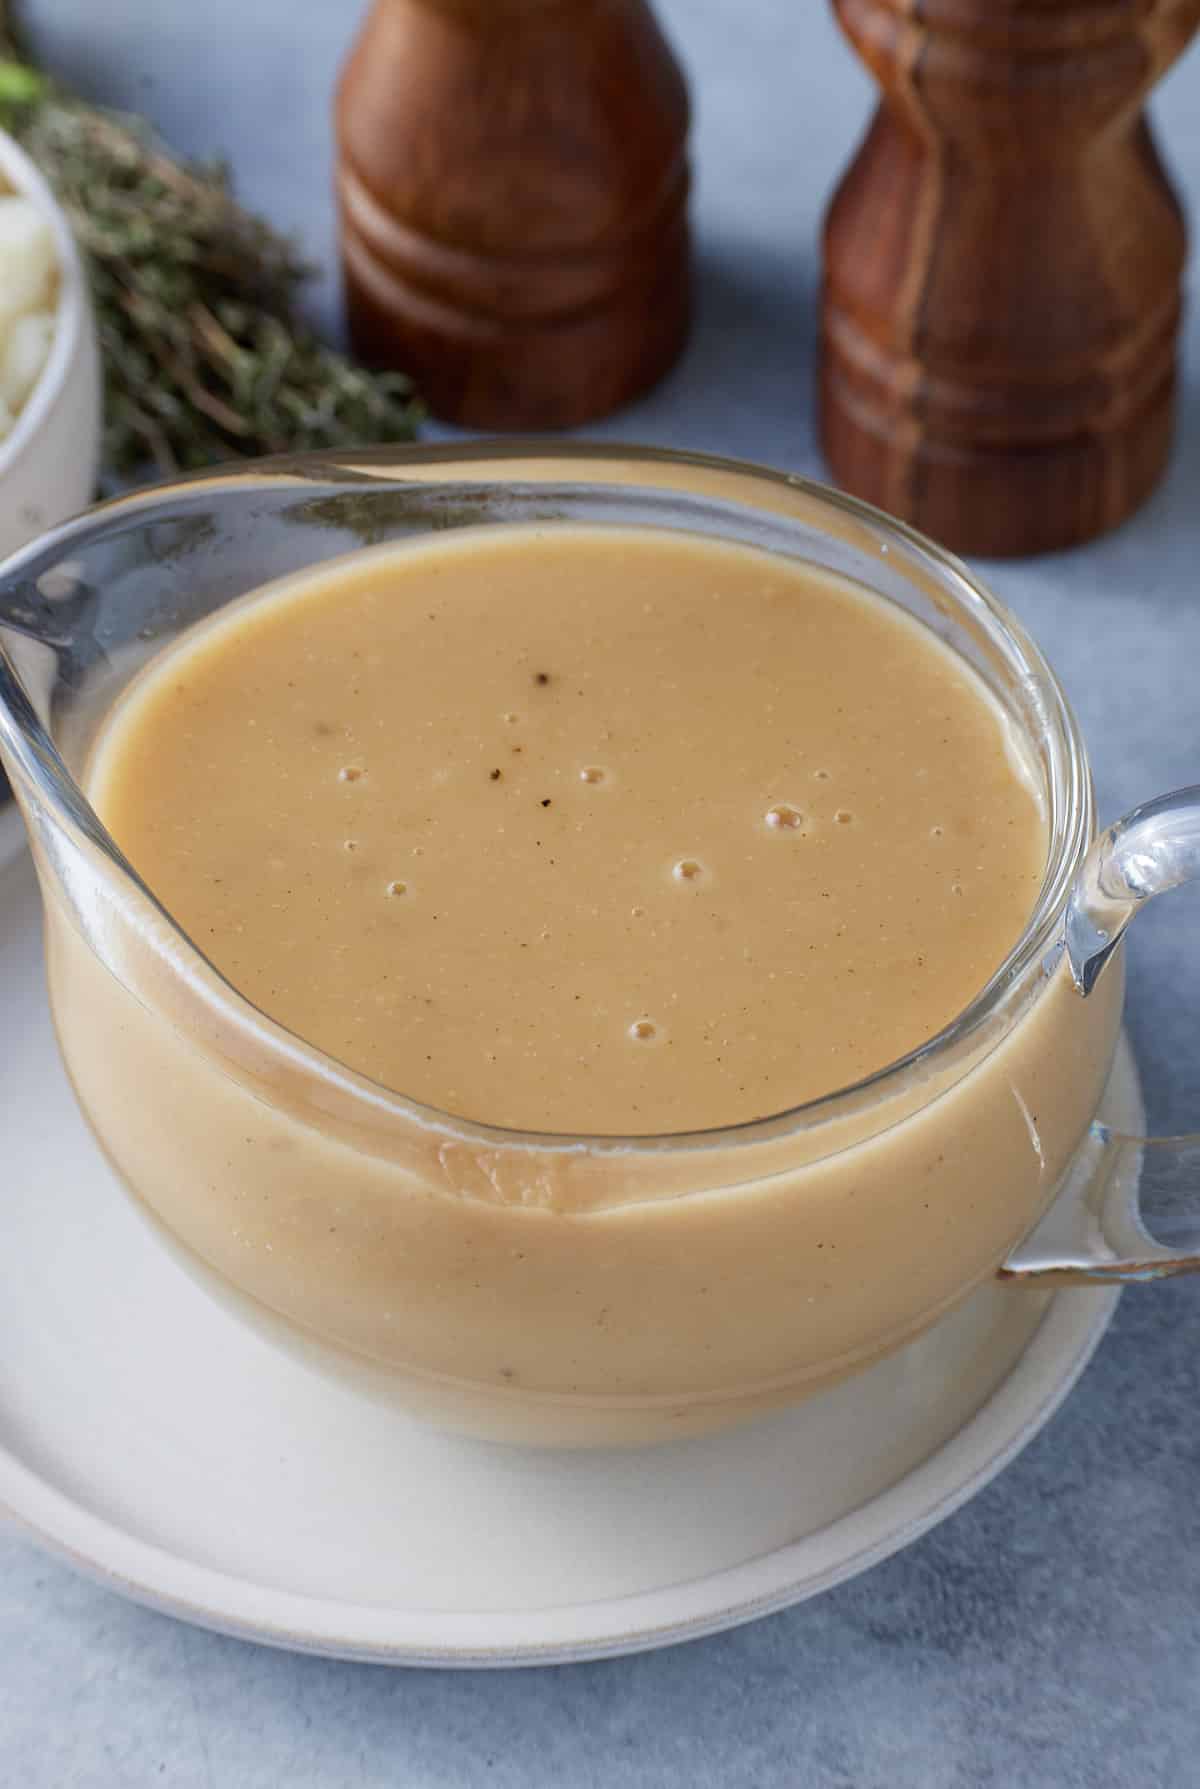 A glass gravy jug filled with brown gravy